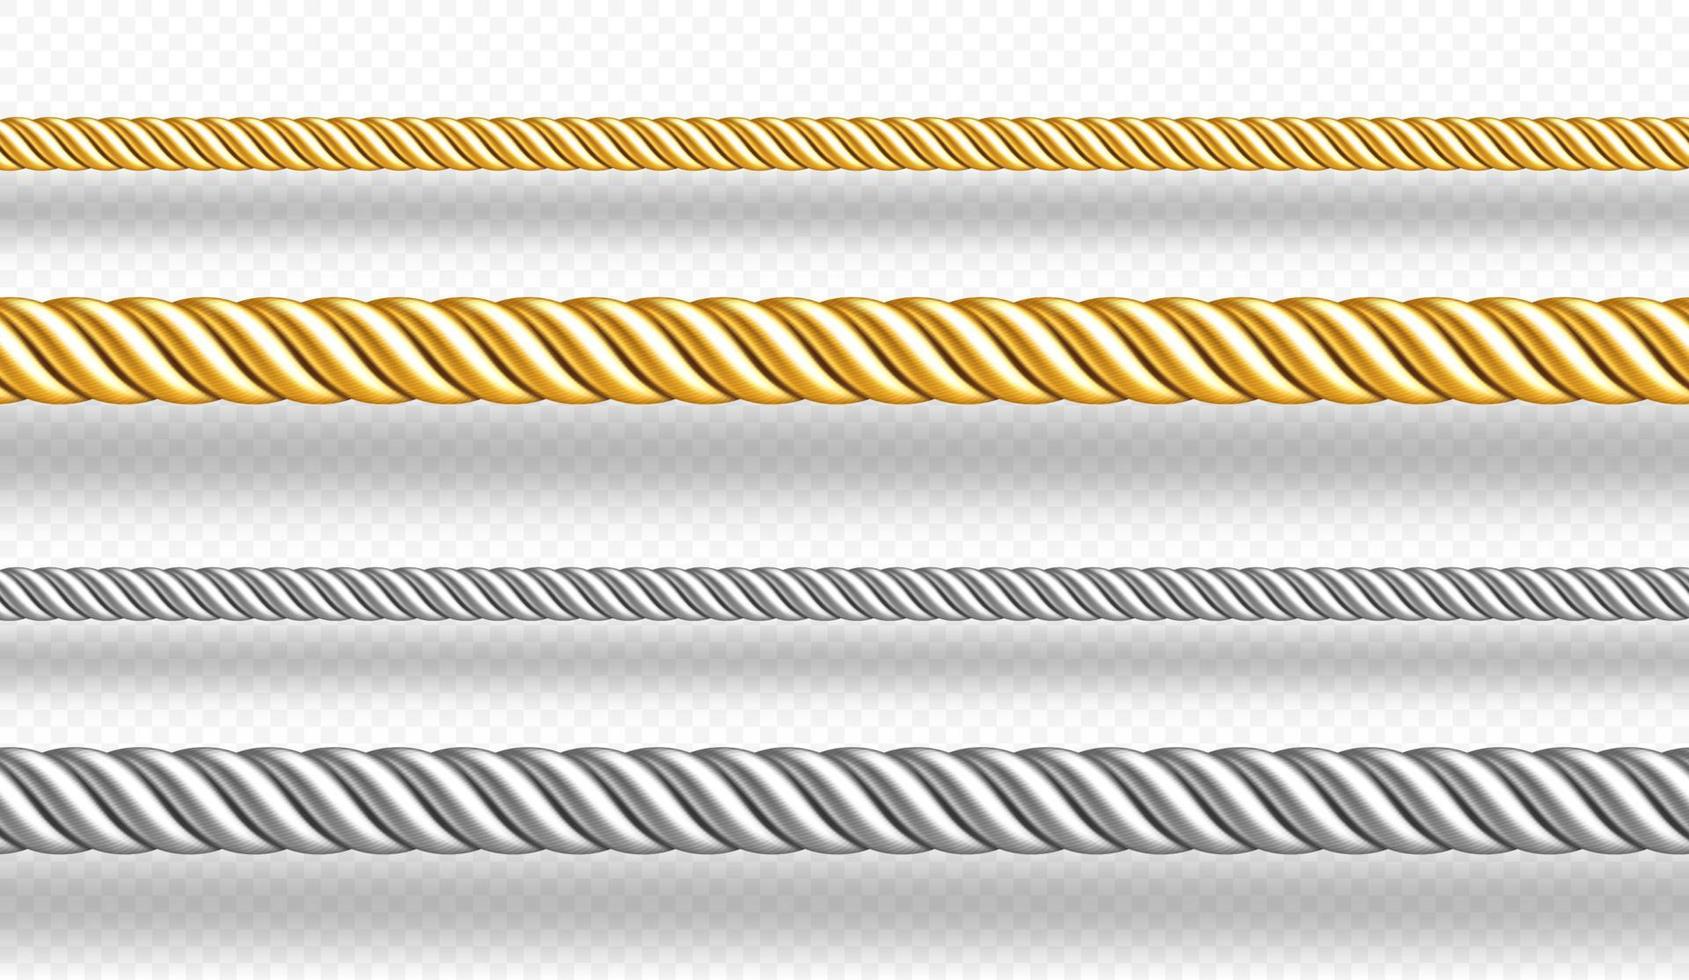 Gold and silver ropes, twisted twines vector